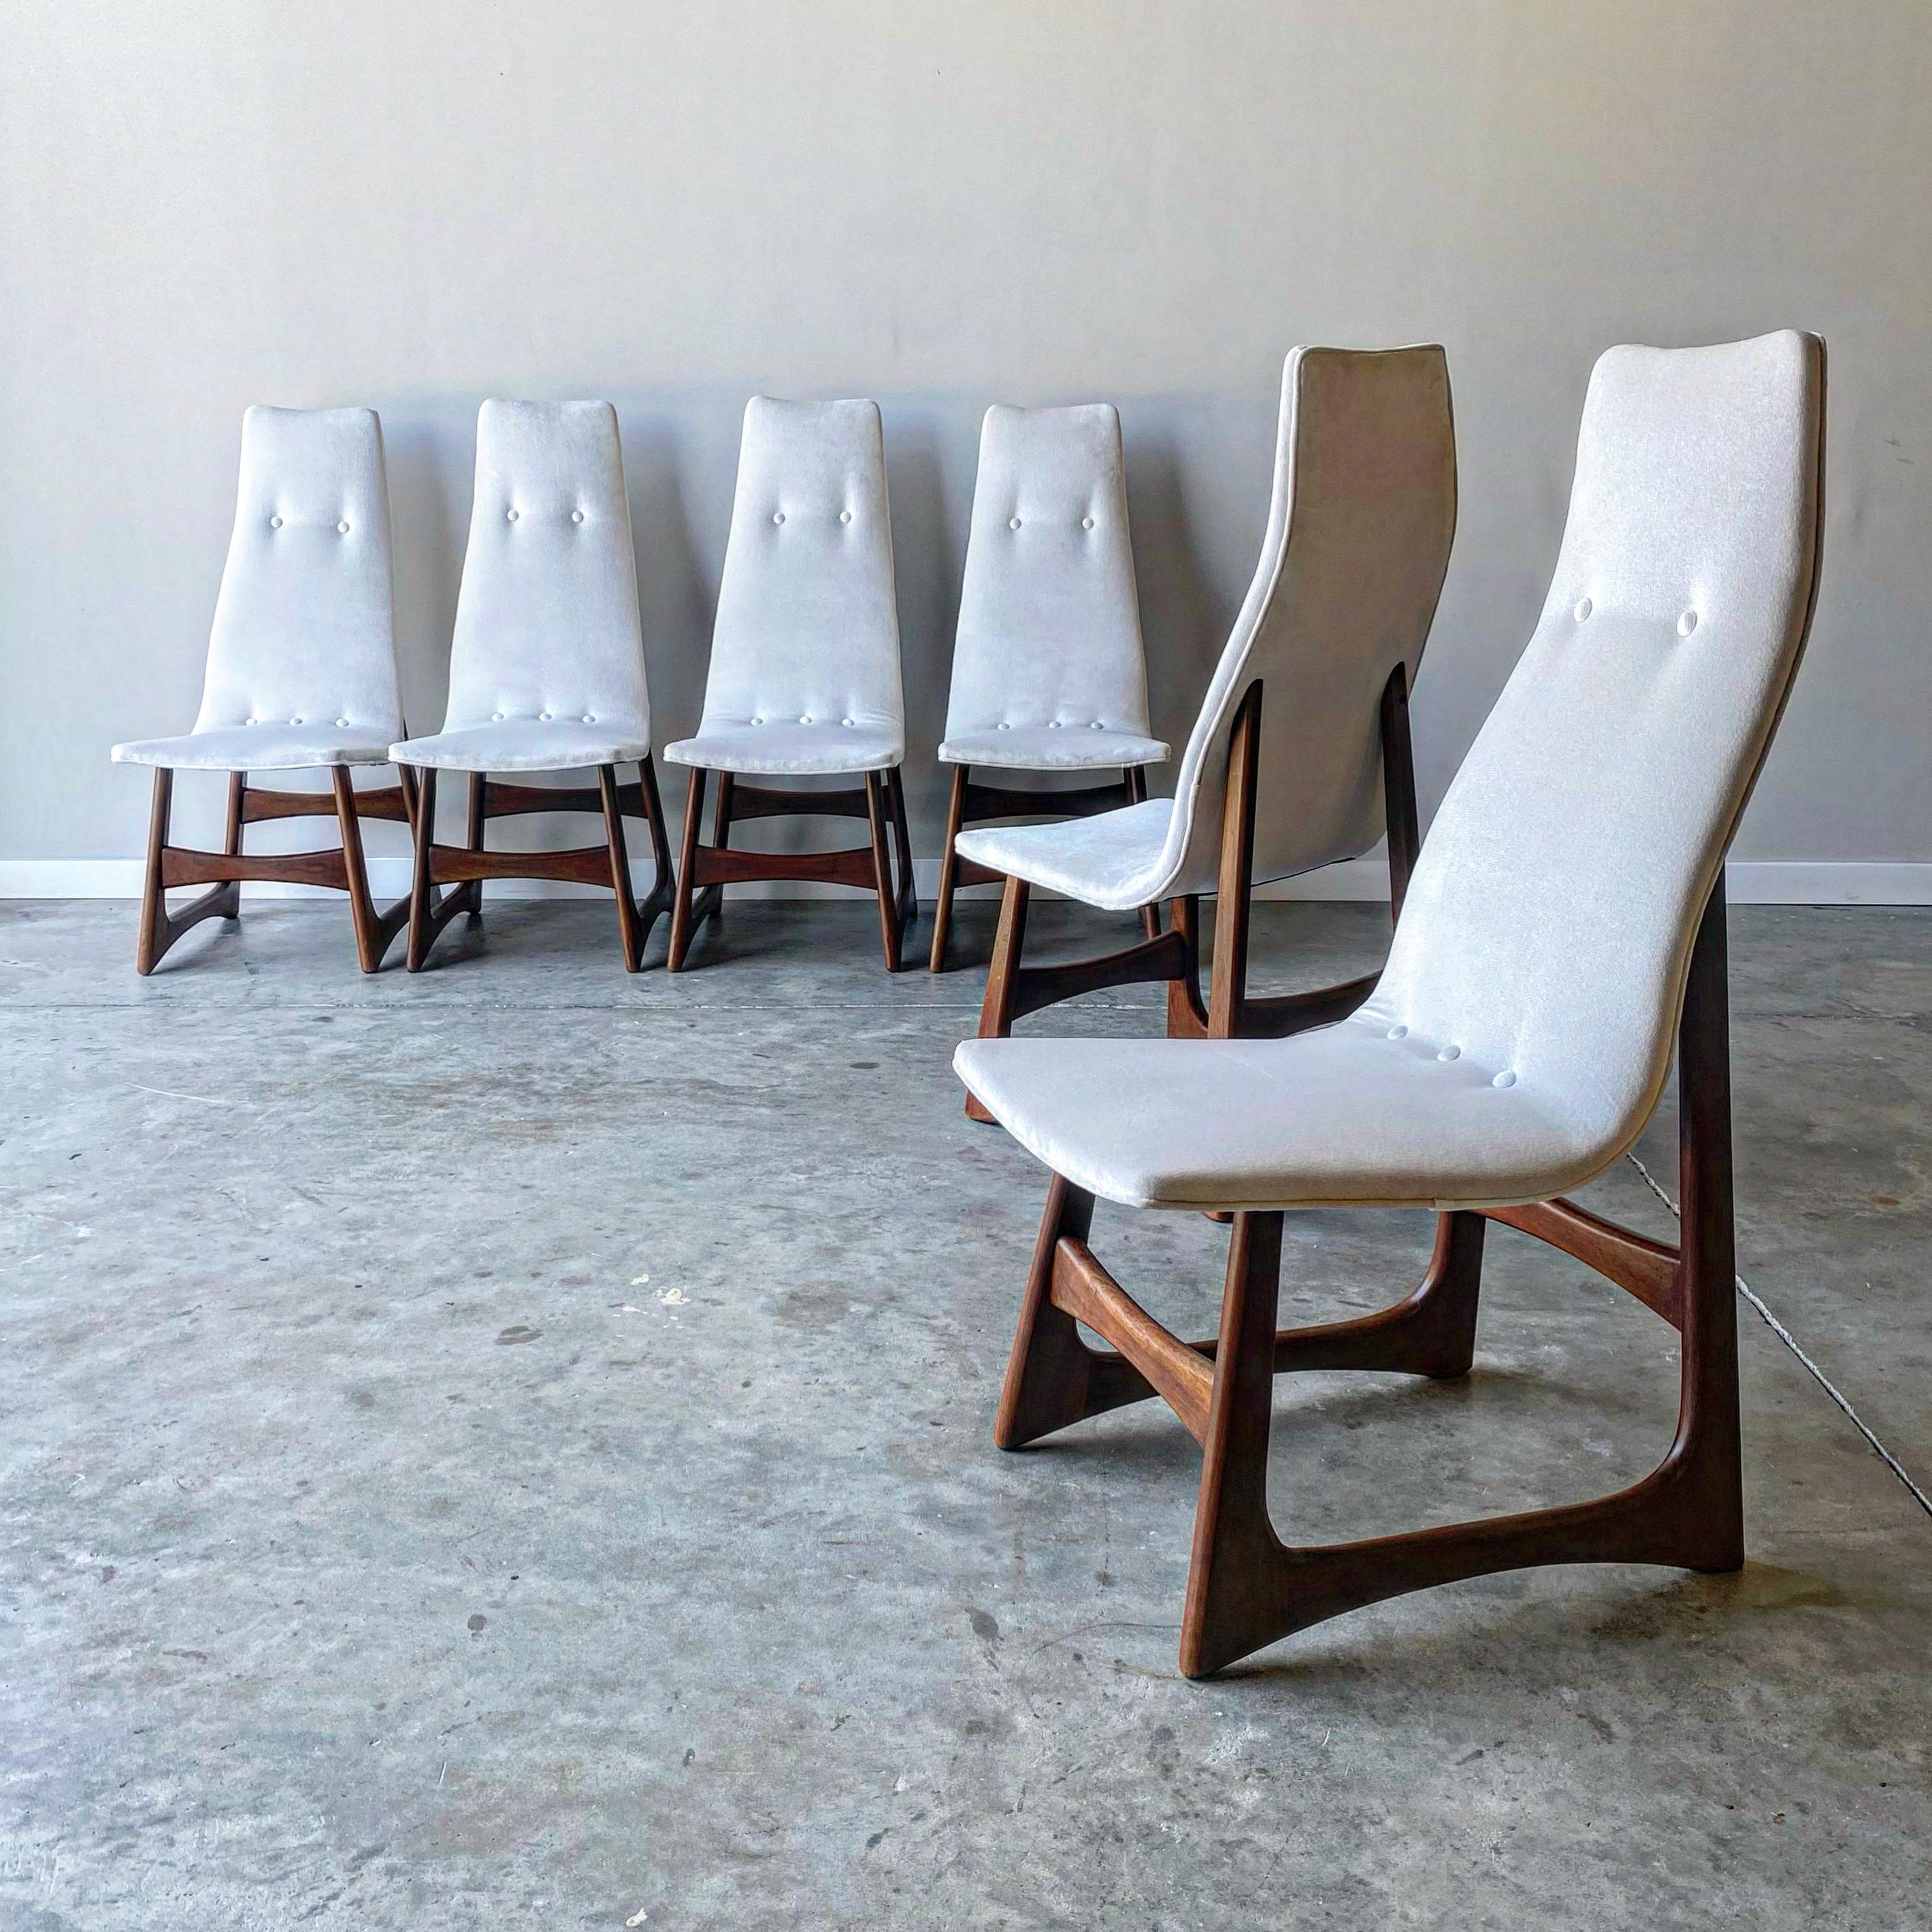 Walnut Adrian Pearsall High-Back Dining Chairs, Set of 6 For Sale